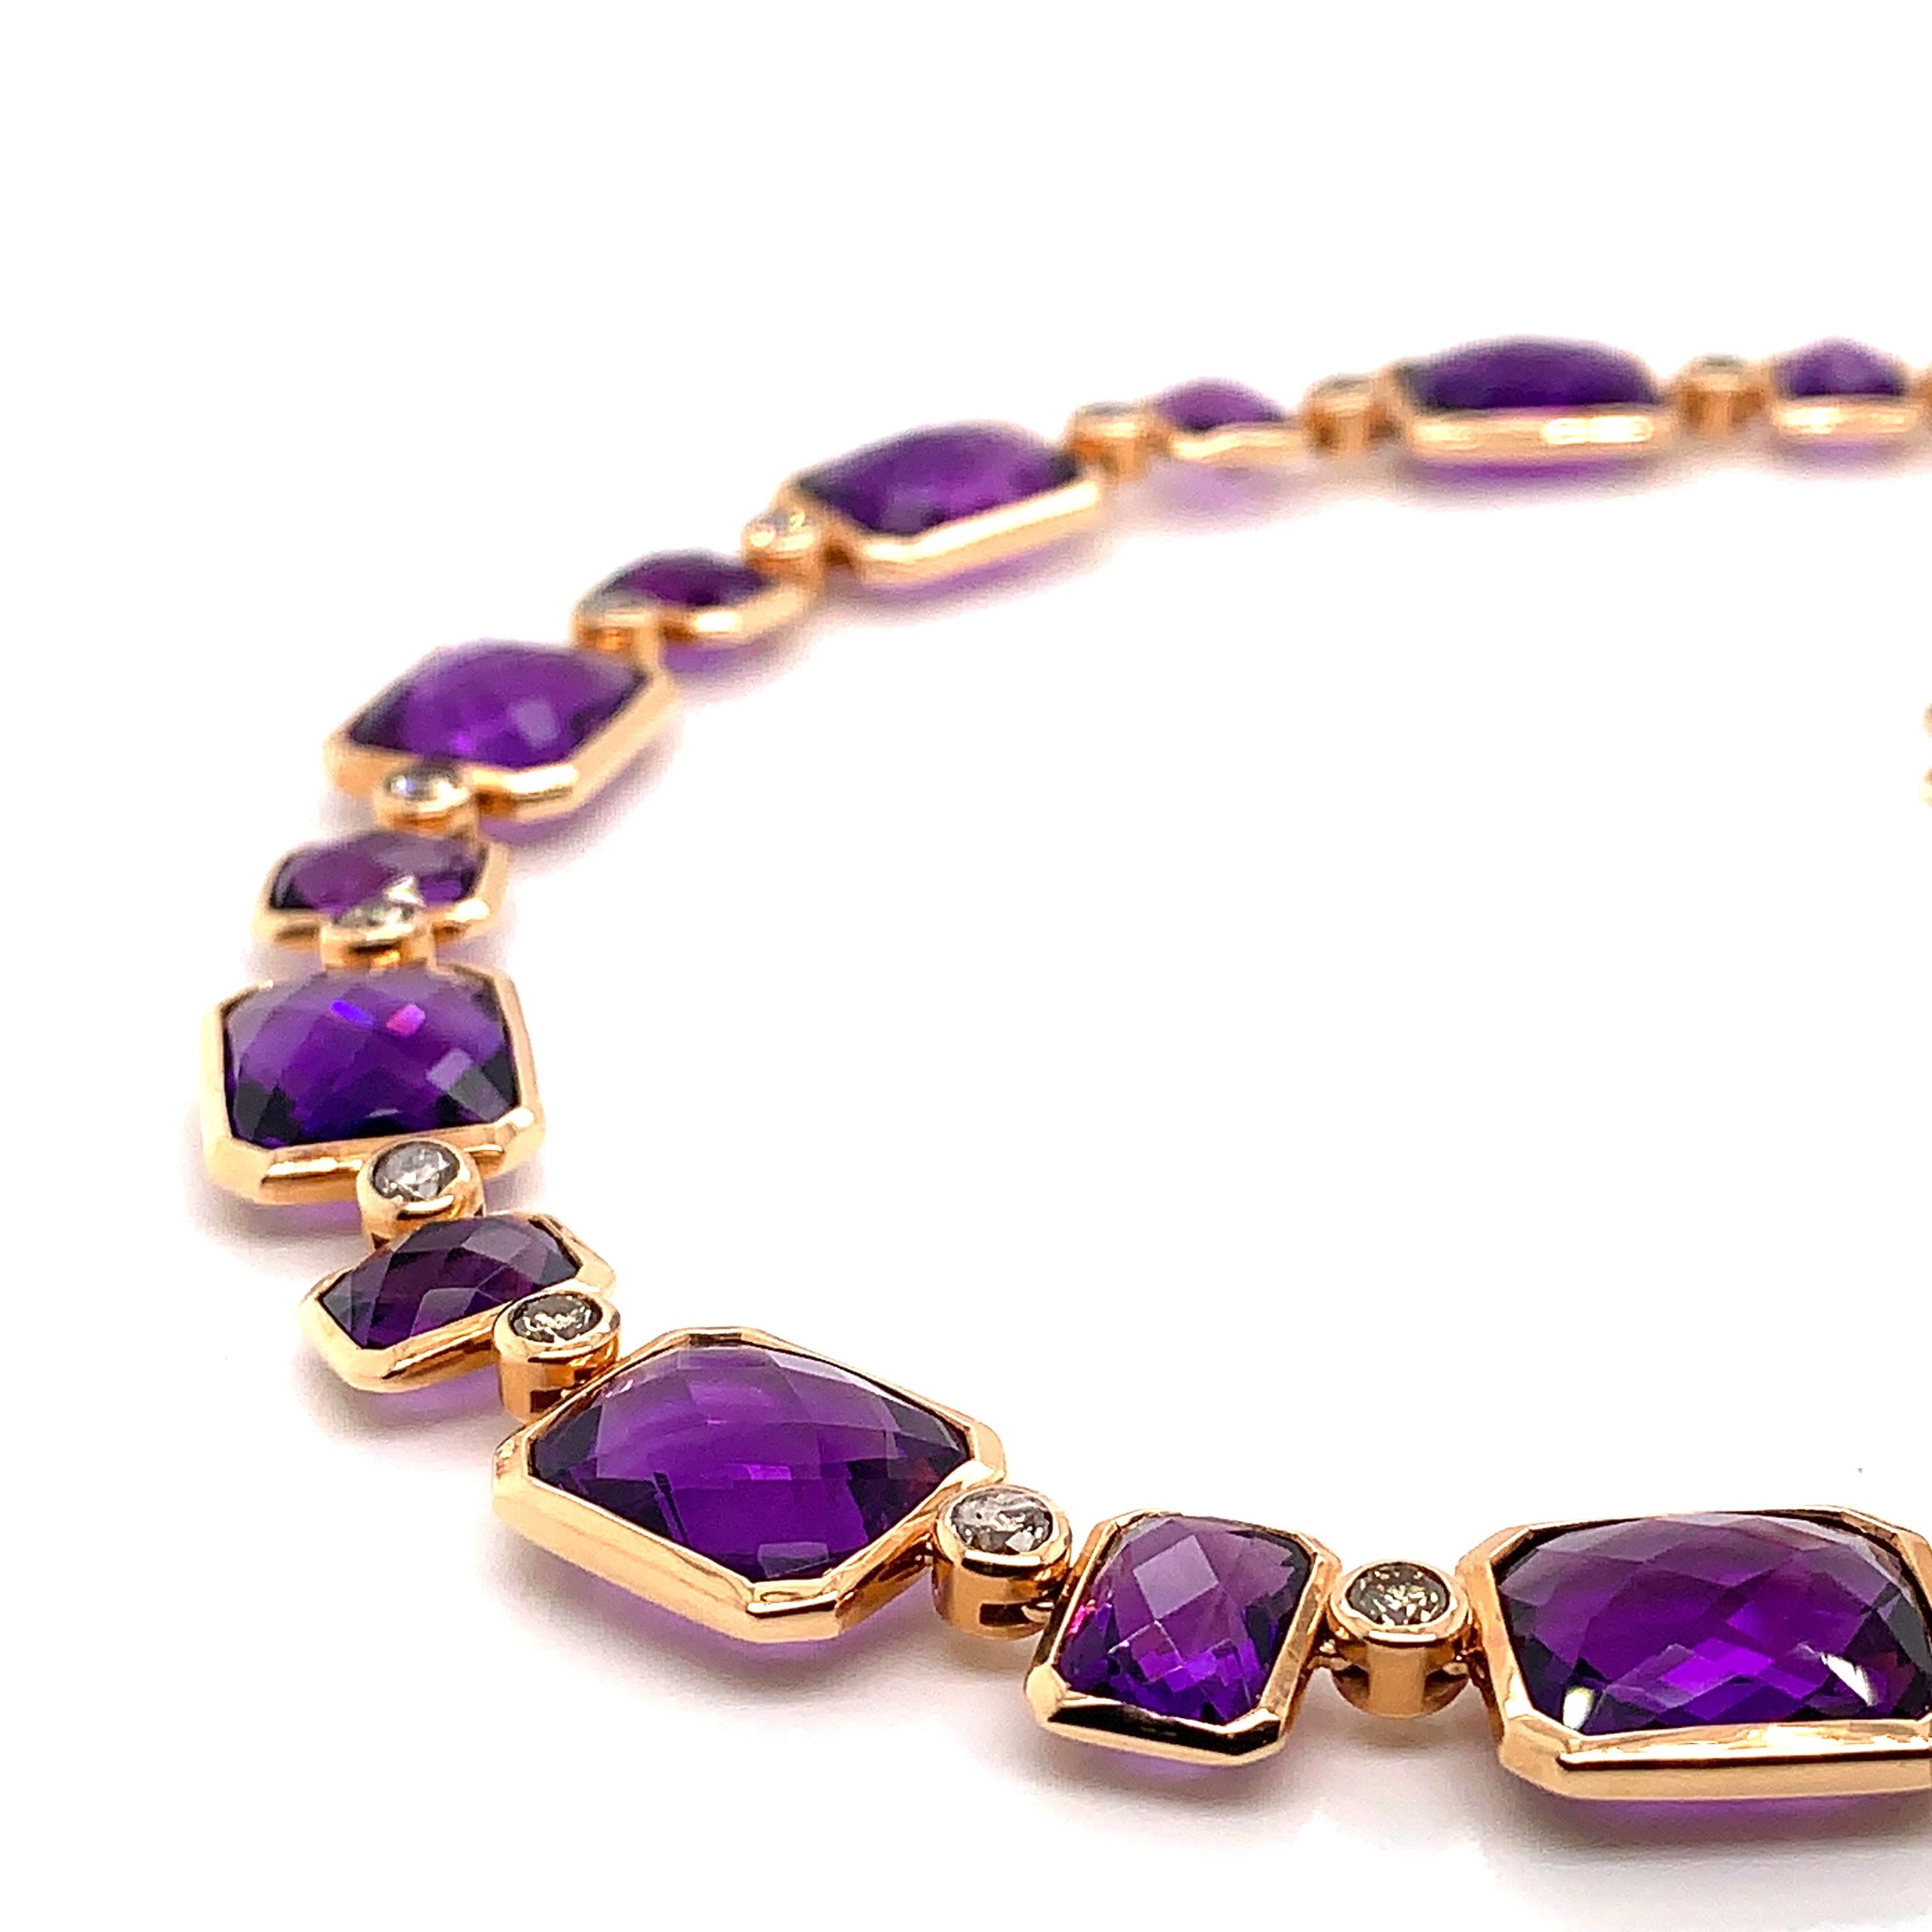 Glamorous Gemstones - Sunita Nahata started off her career as a gemstone trader, and this particular collection reflects her love for multi-coloured semi-precious gemstones. This necklace features over eighty carats of vibrant amethysts. The setting